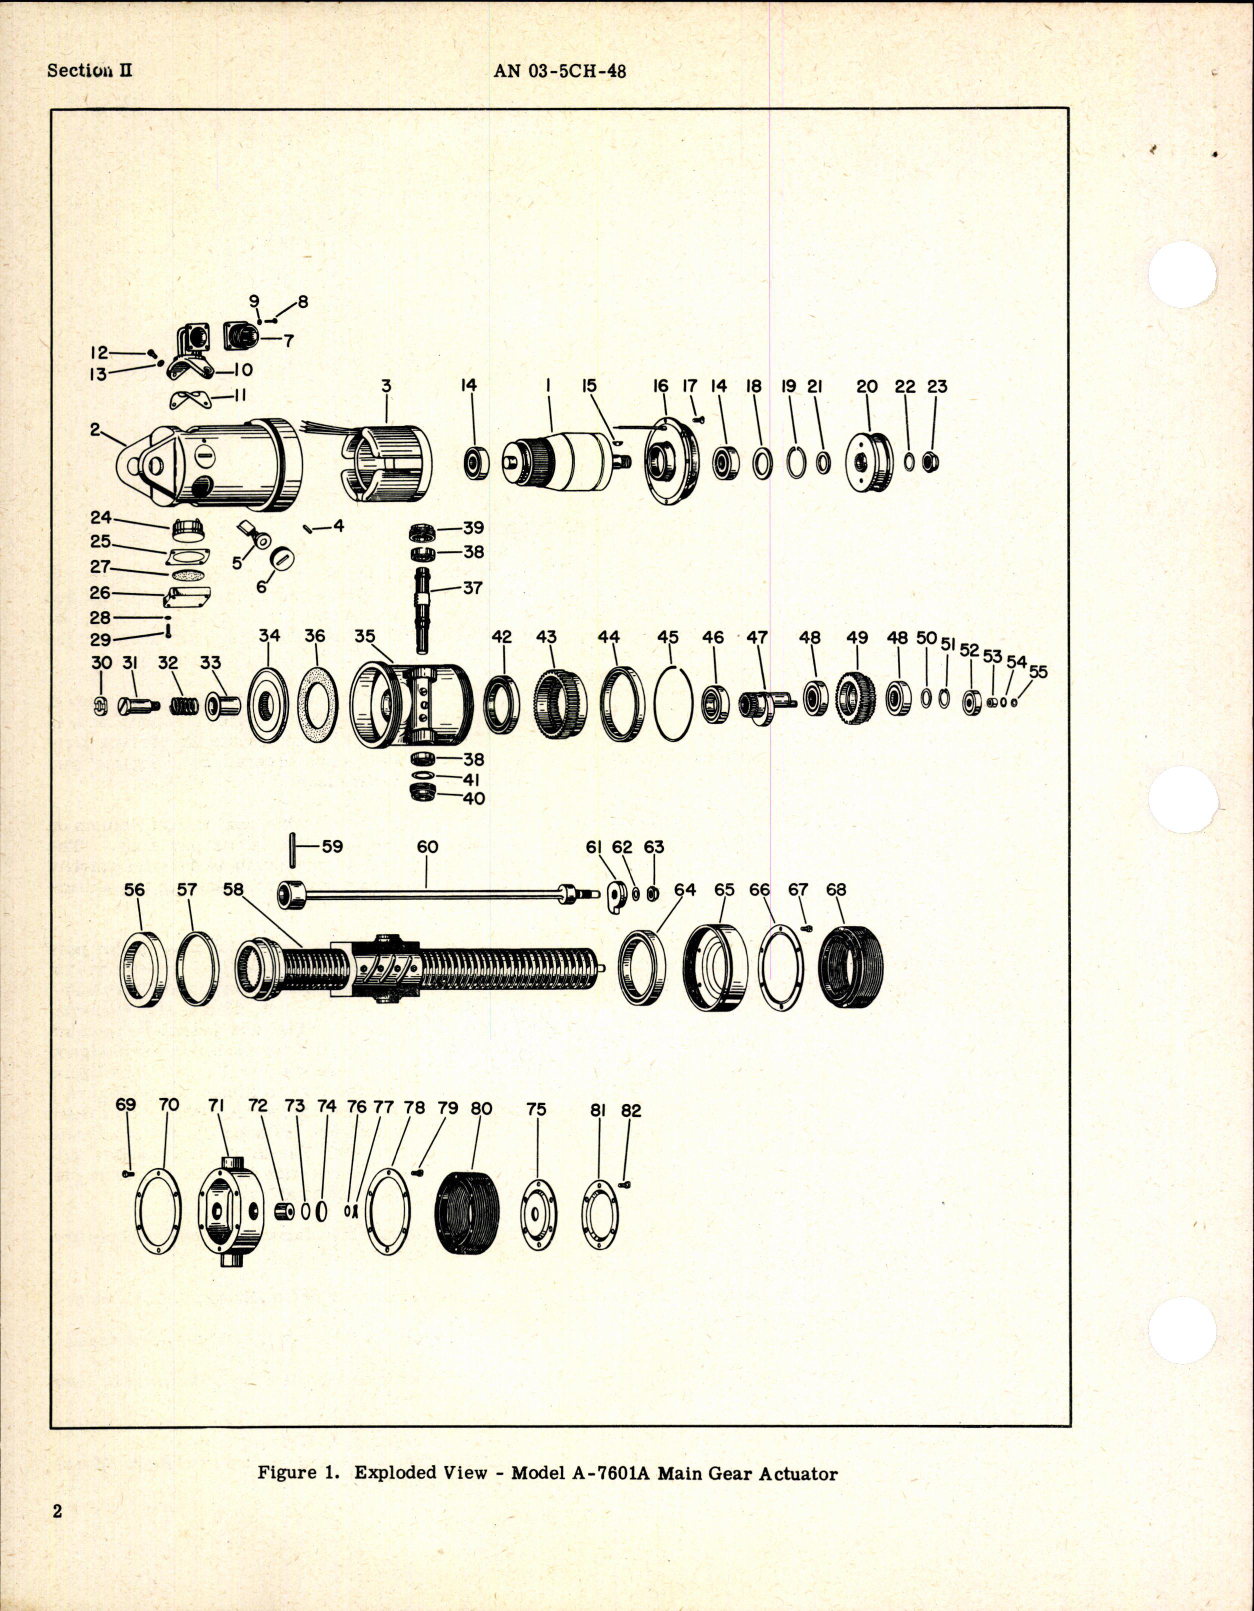 Sample page 4 from AirCorps Library document: Parts Catalog for Main and Nose Wheel Actuators